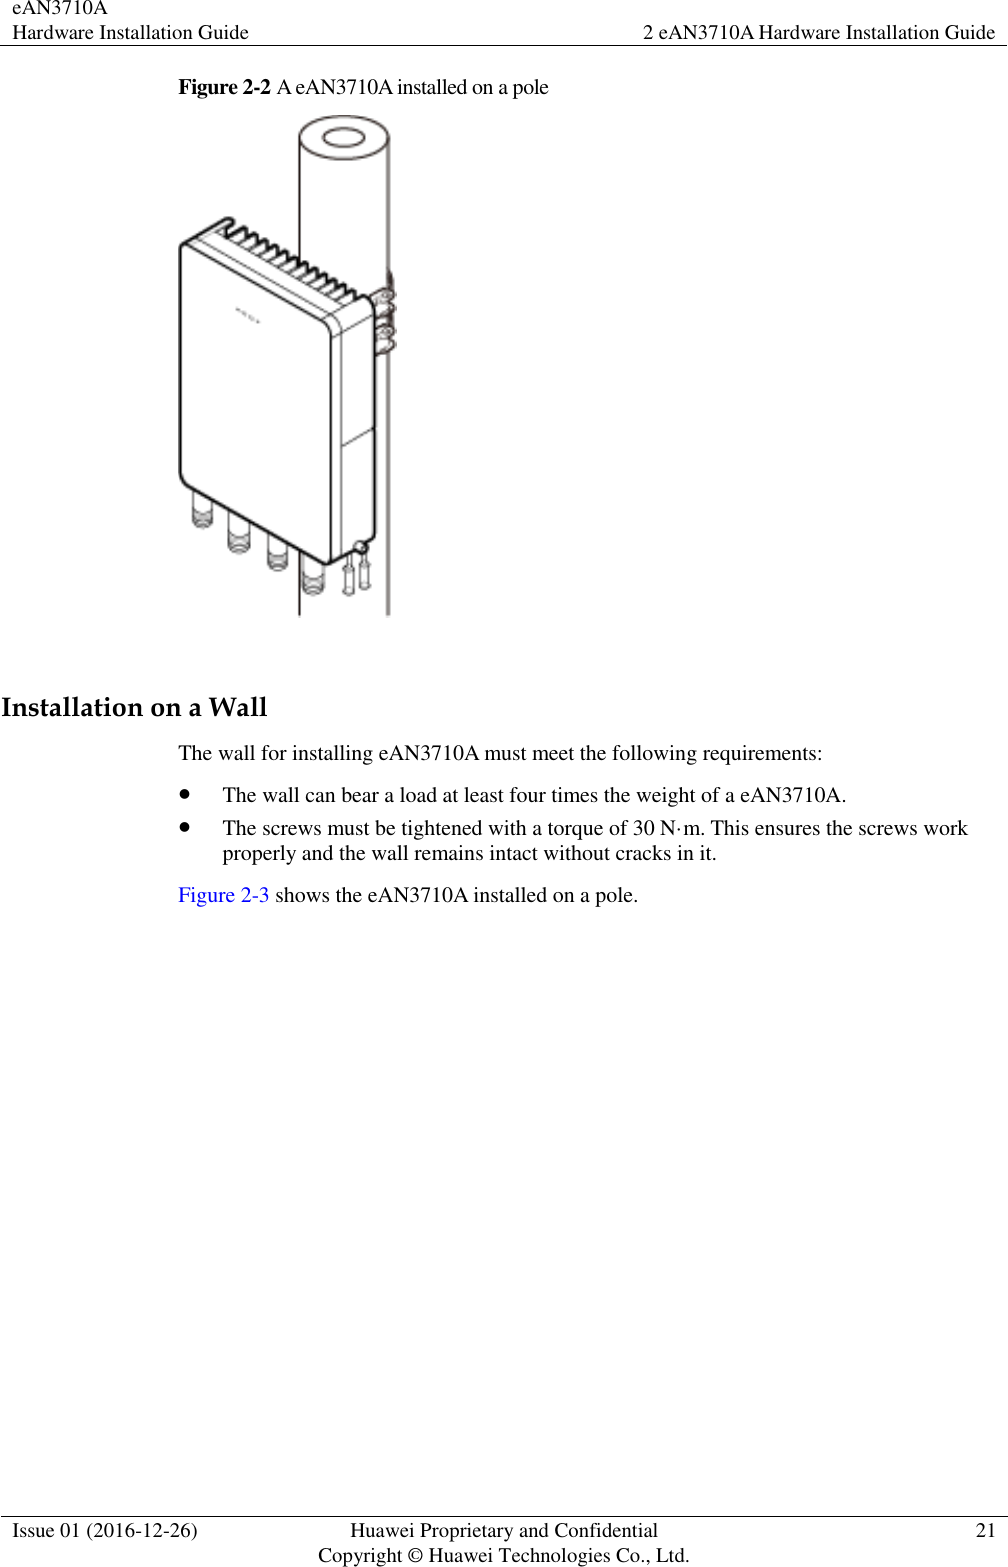 eAN3710A Hardware Installation Guide 2 eAN3710A Hardware Installation Guide  Issue 01 (2016-12-26) Huawei Proprietary and Confidential                                     Copyright © Huawei Technologies Co., Ltd. 21  Figure 2-2 A eAN3710A installed on a pole   Installation on a Wall The wall for installing eAN3710A must meet the following requirements:    The wall can bear a load at least four times the weight of a eAN3710A.  The screws must be tightened with a torque of 30 N·m. This ensures the screws work properly and the wall remains intact without cracks in it.   Figure 2-3 shows the eAN3710A installed on a pole. 